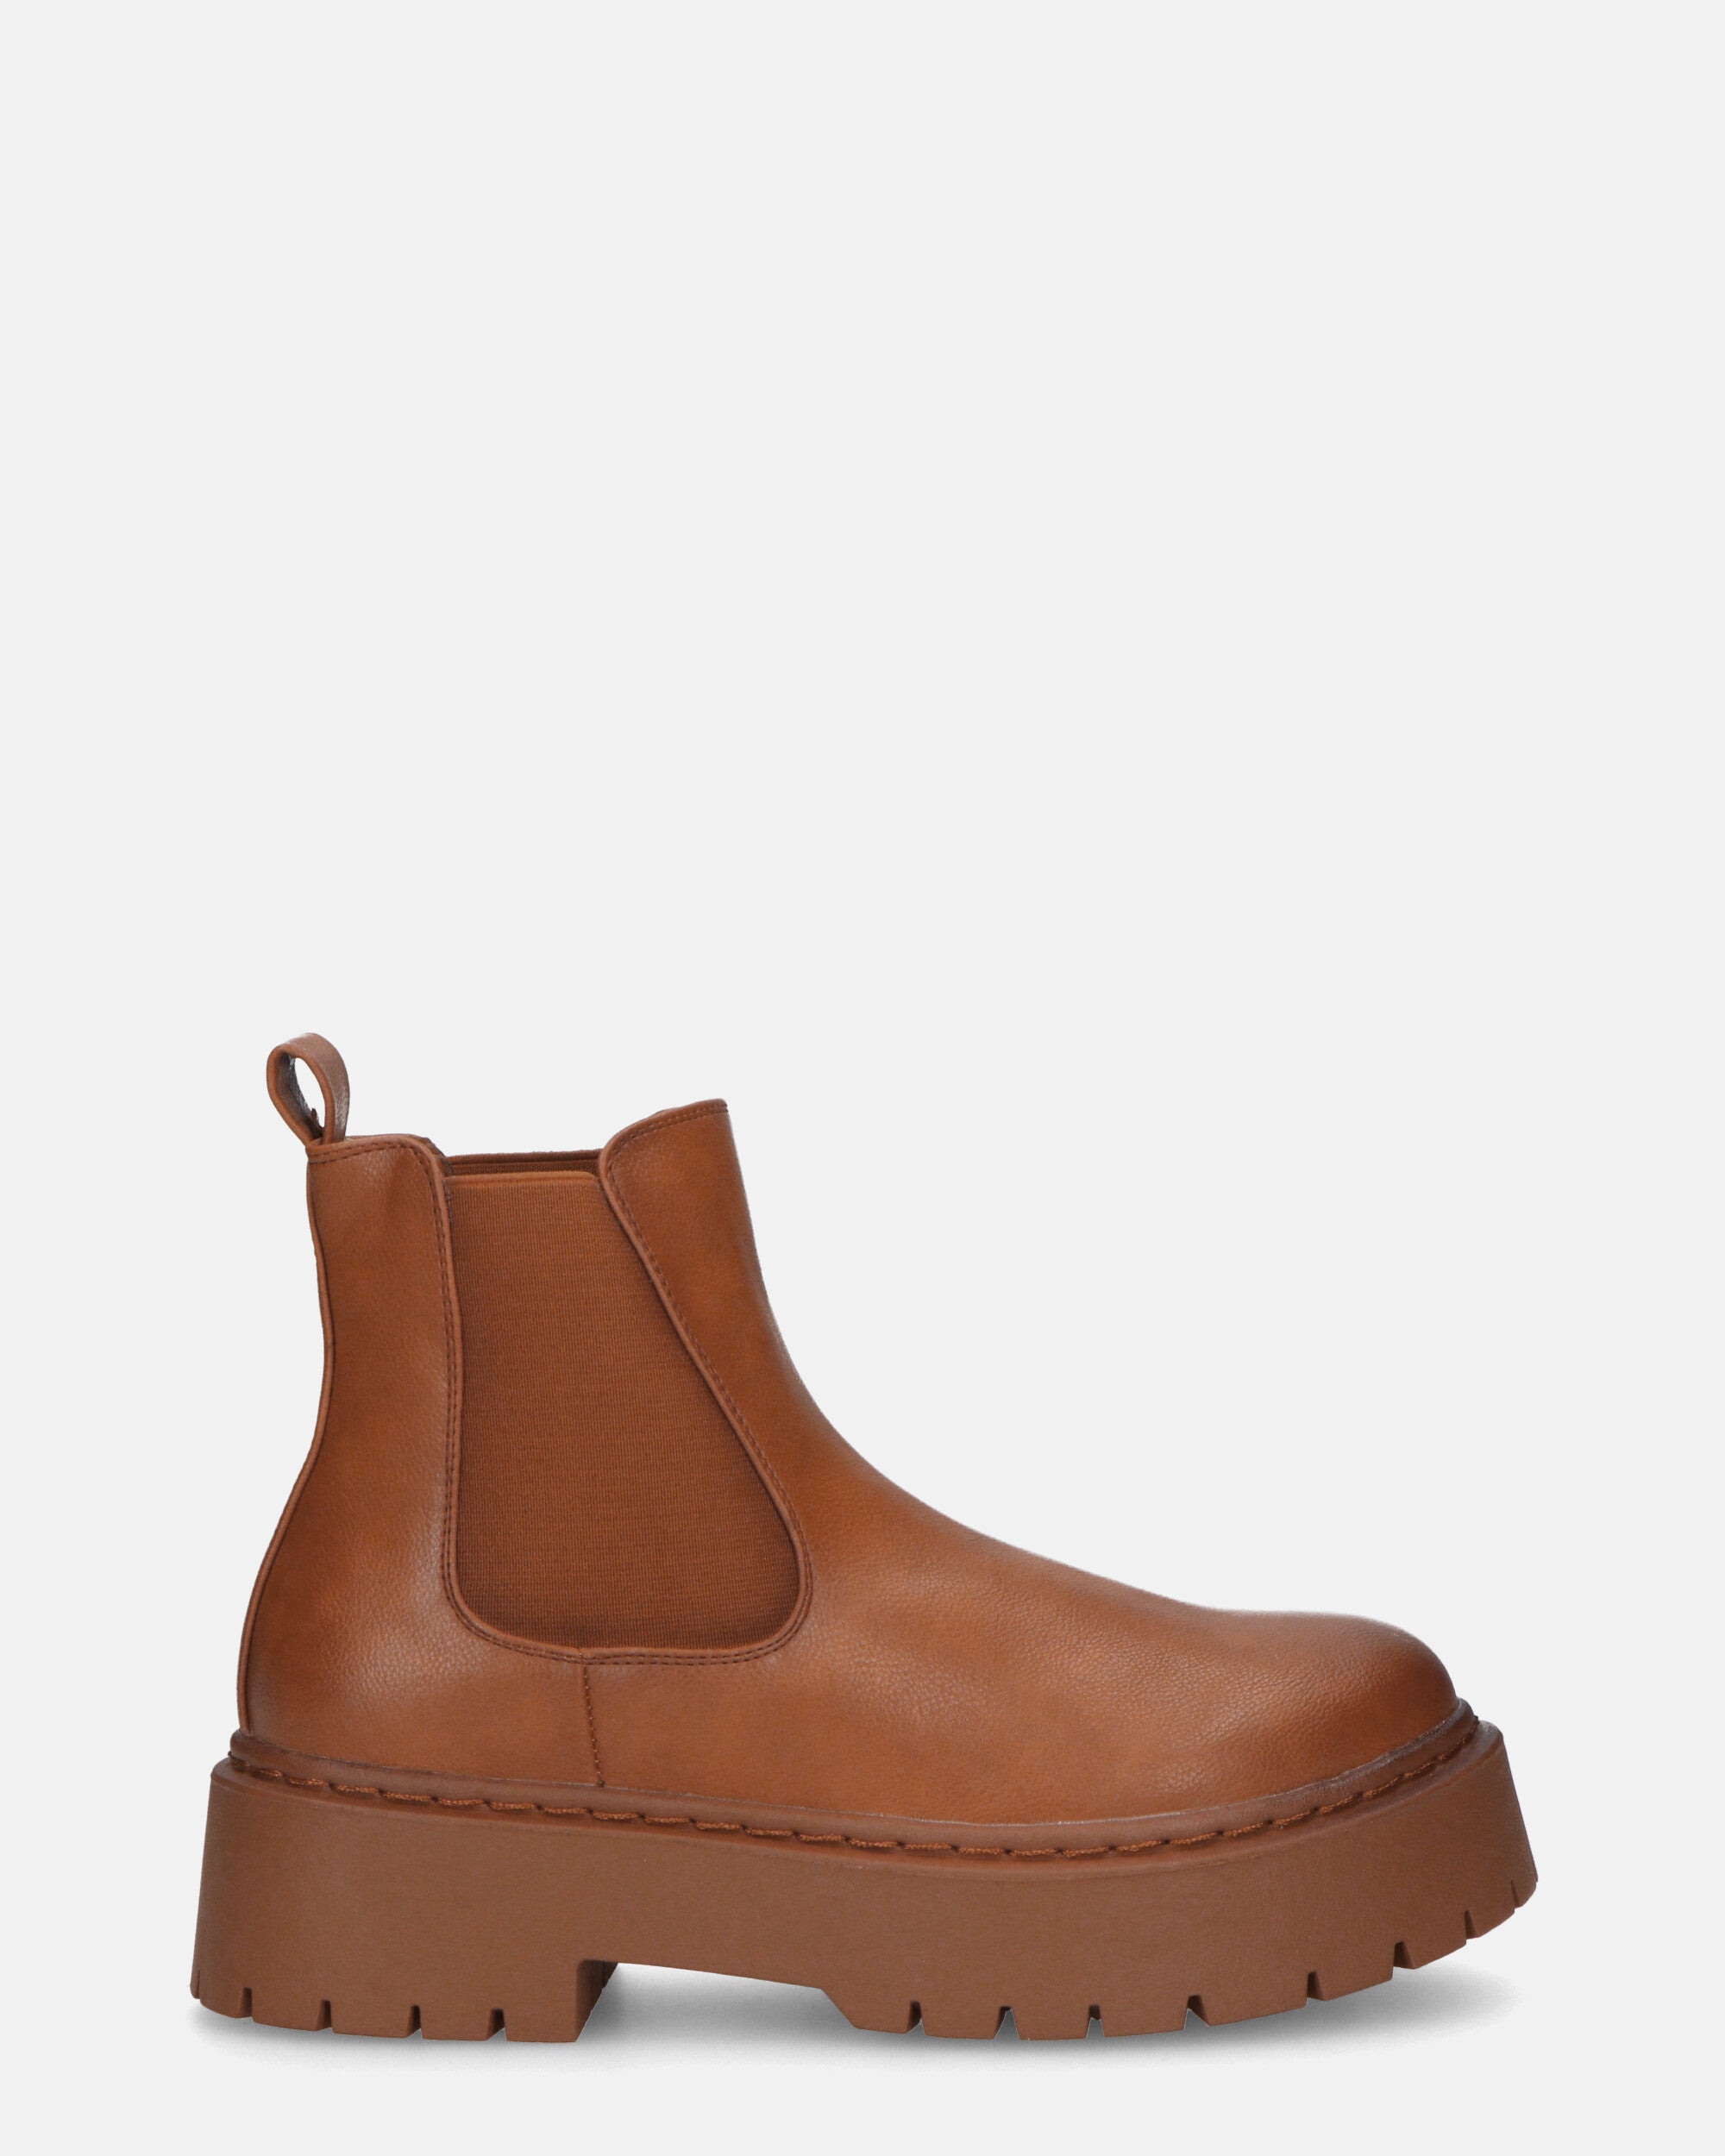 TULLY - brown platform faux leather ankle boots